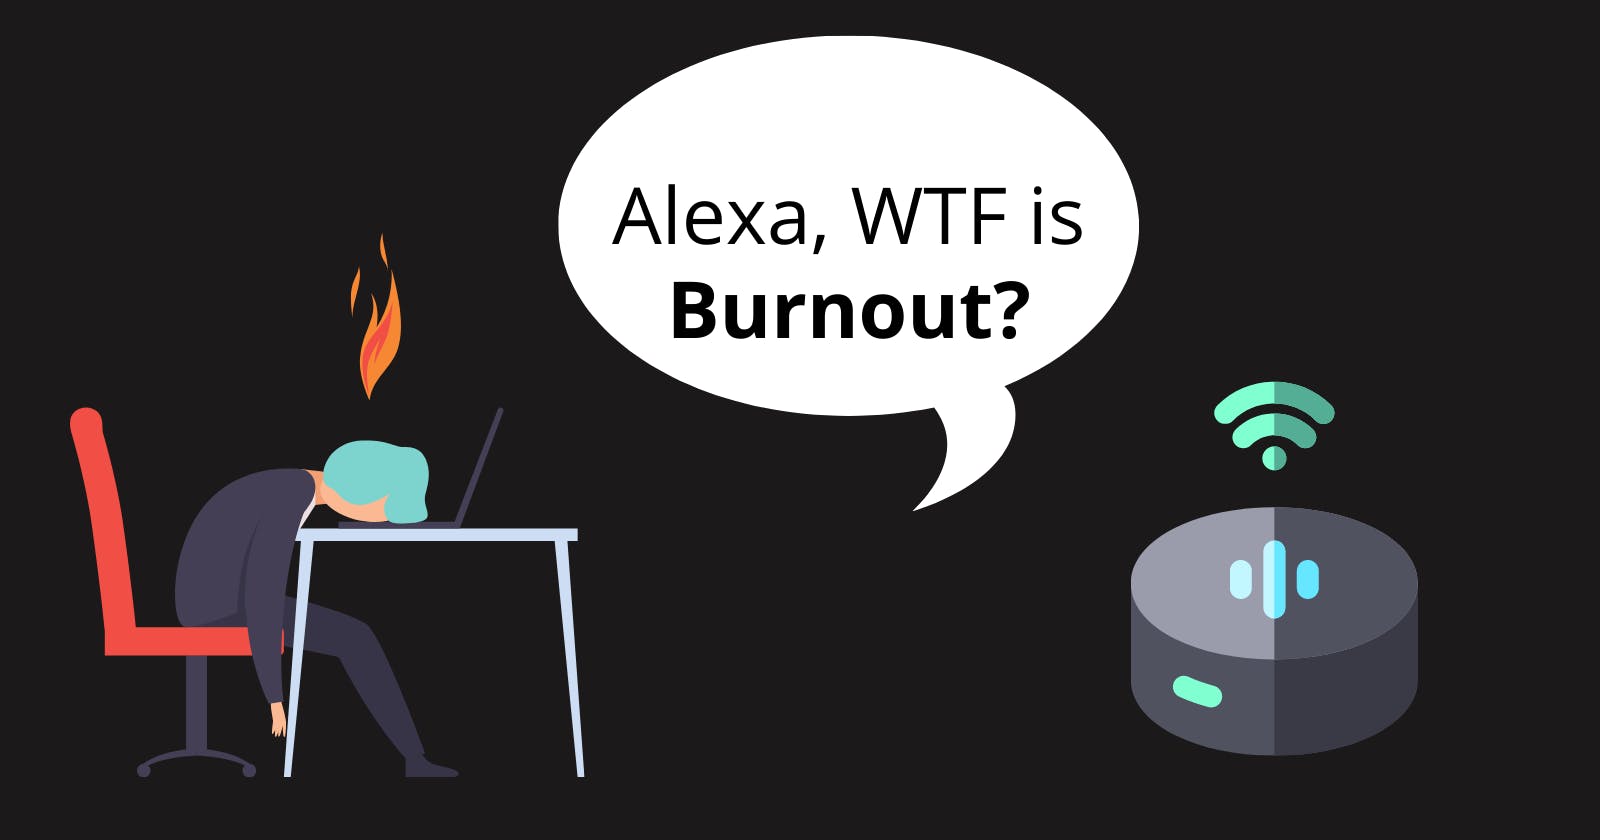 A person is pictured laying their head down against their desk, frustrated. They are feeling burnout from being a developer. There is text on the image that reads: 'Alexa, WTF is Burnout?'